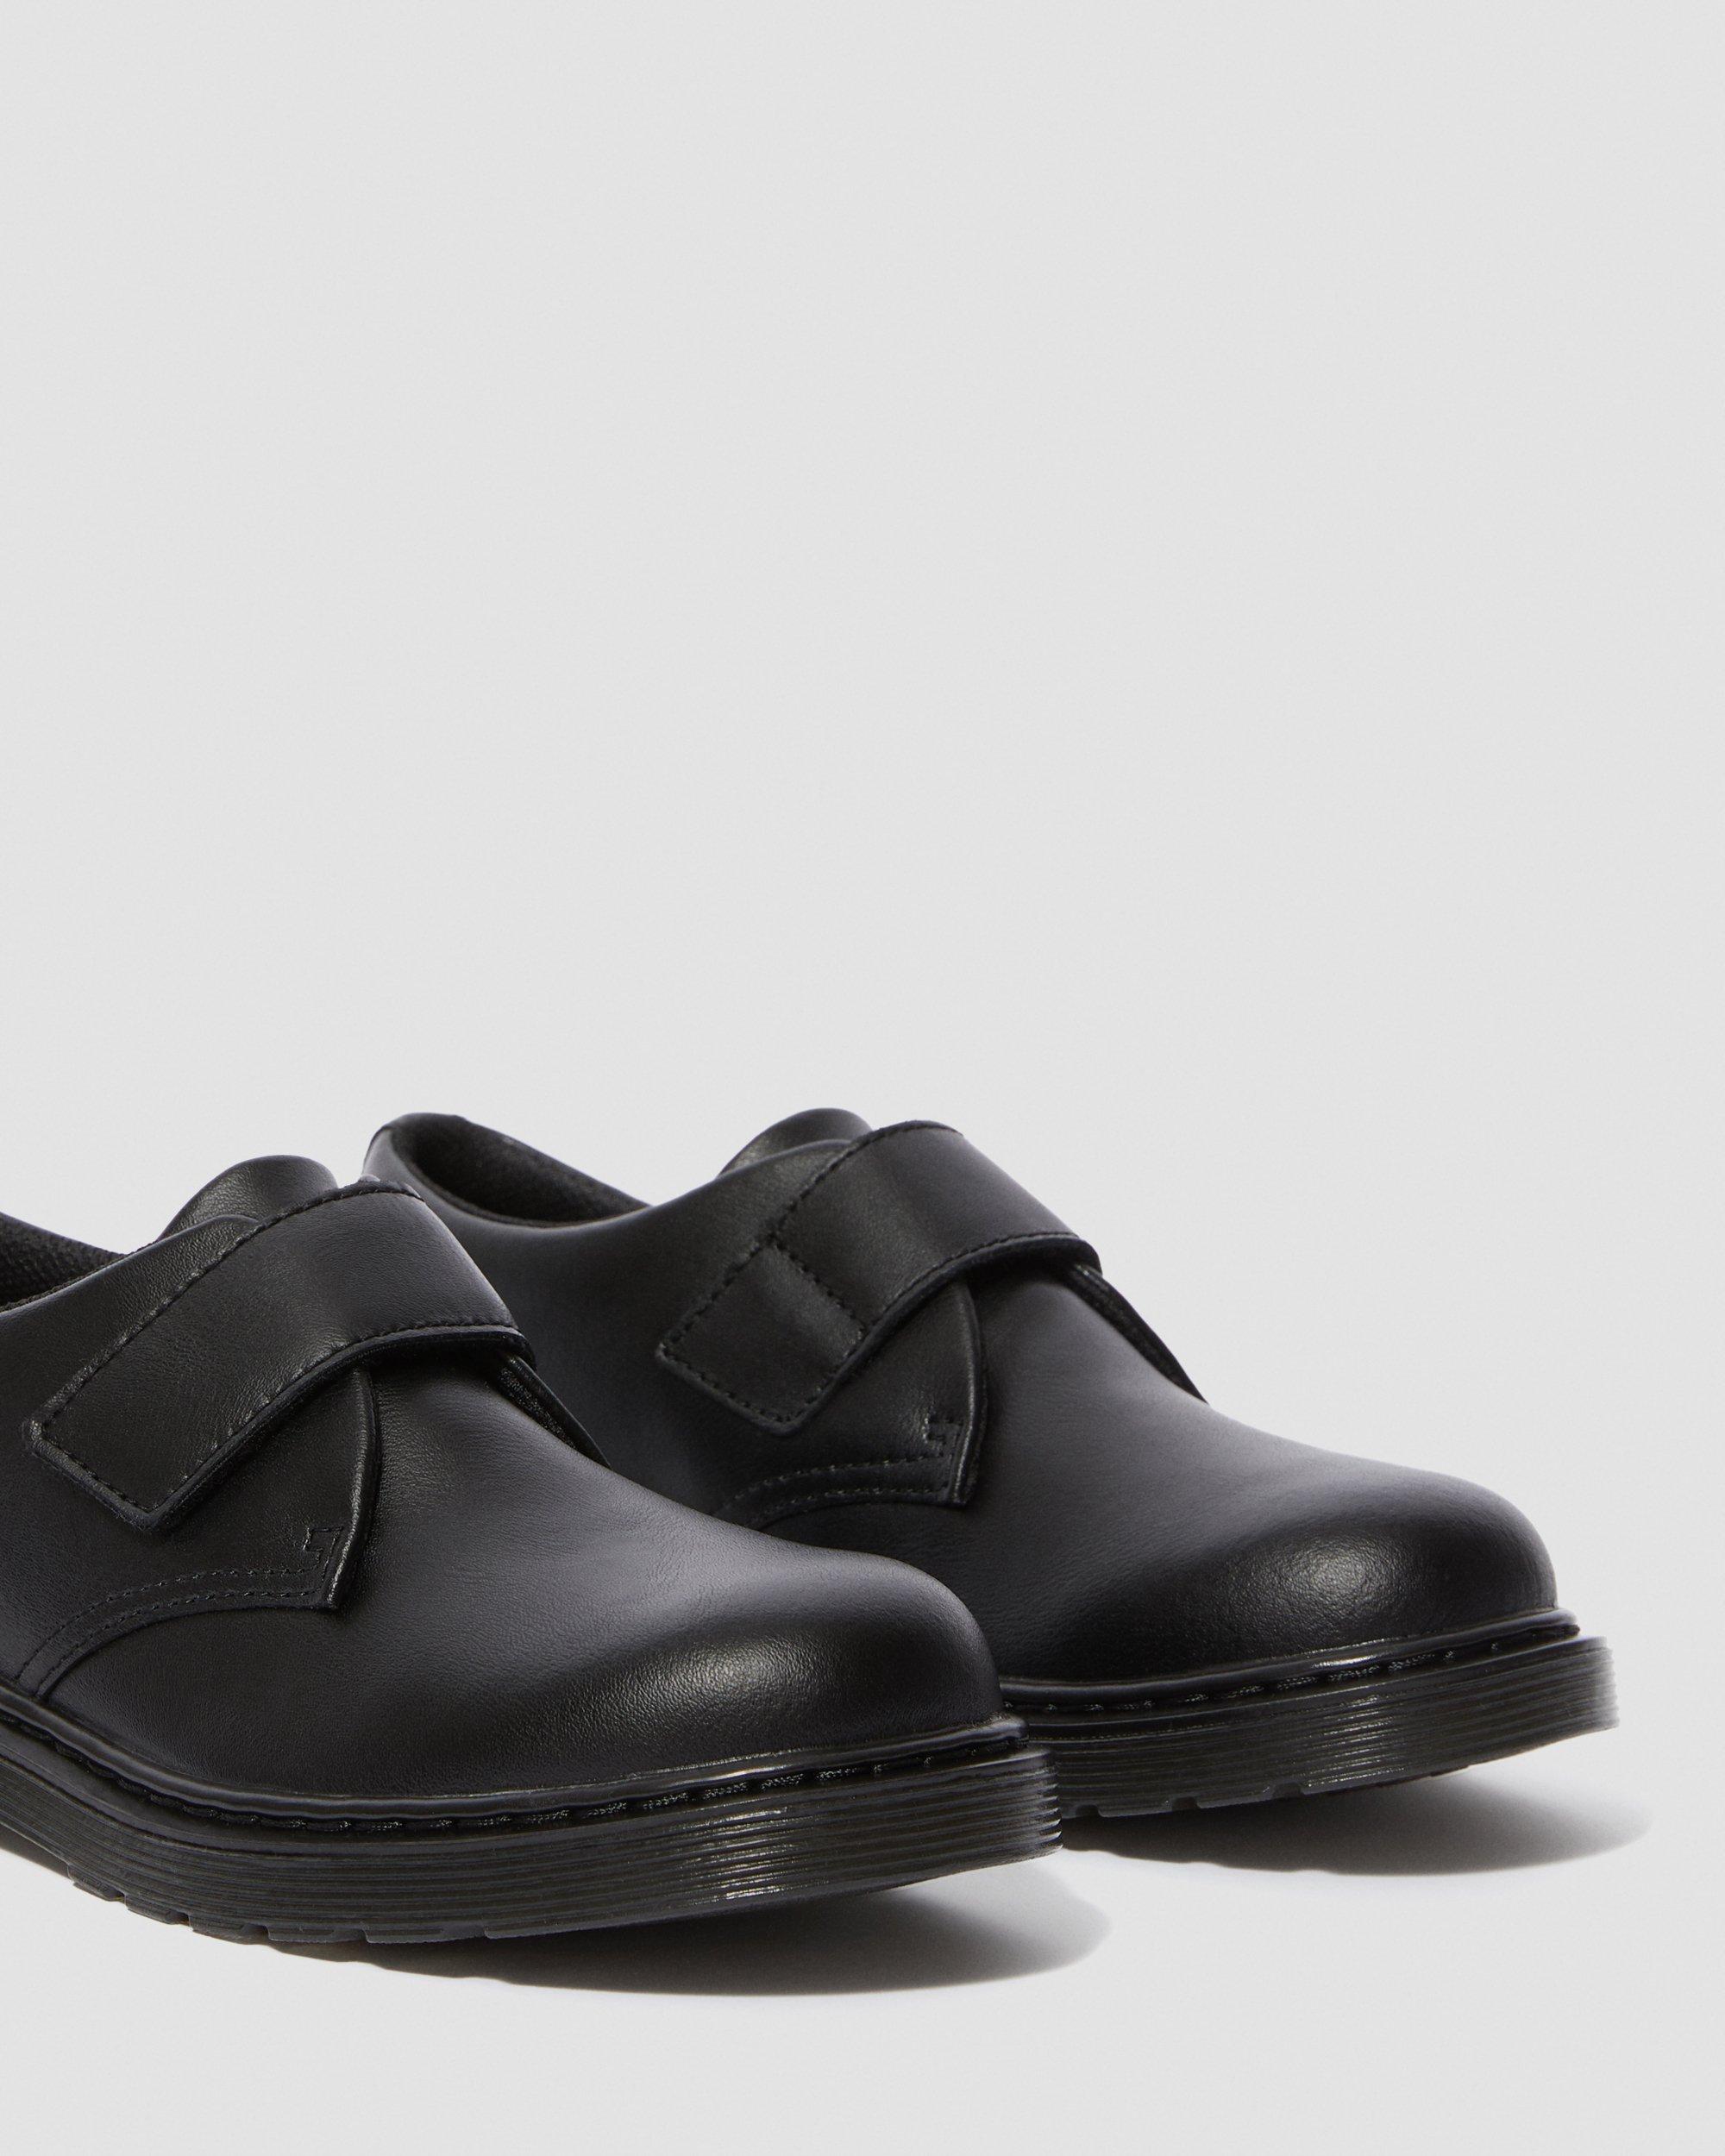 Youth Kamron Velcro Oxford Shoes in Black